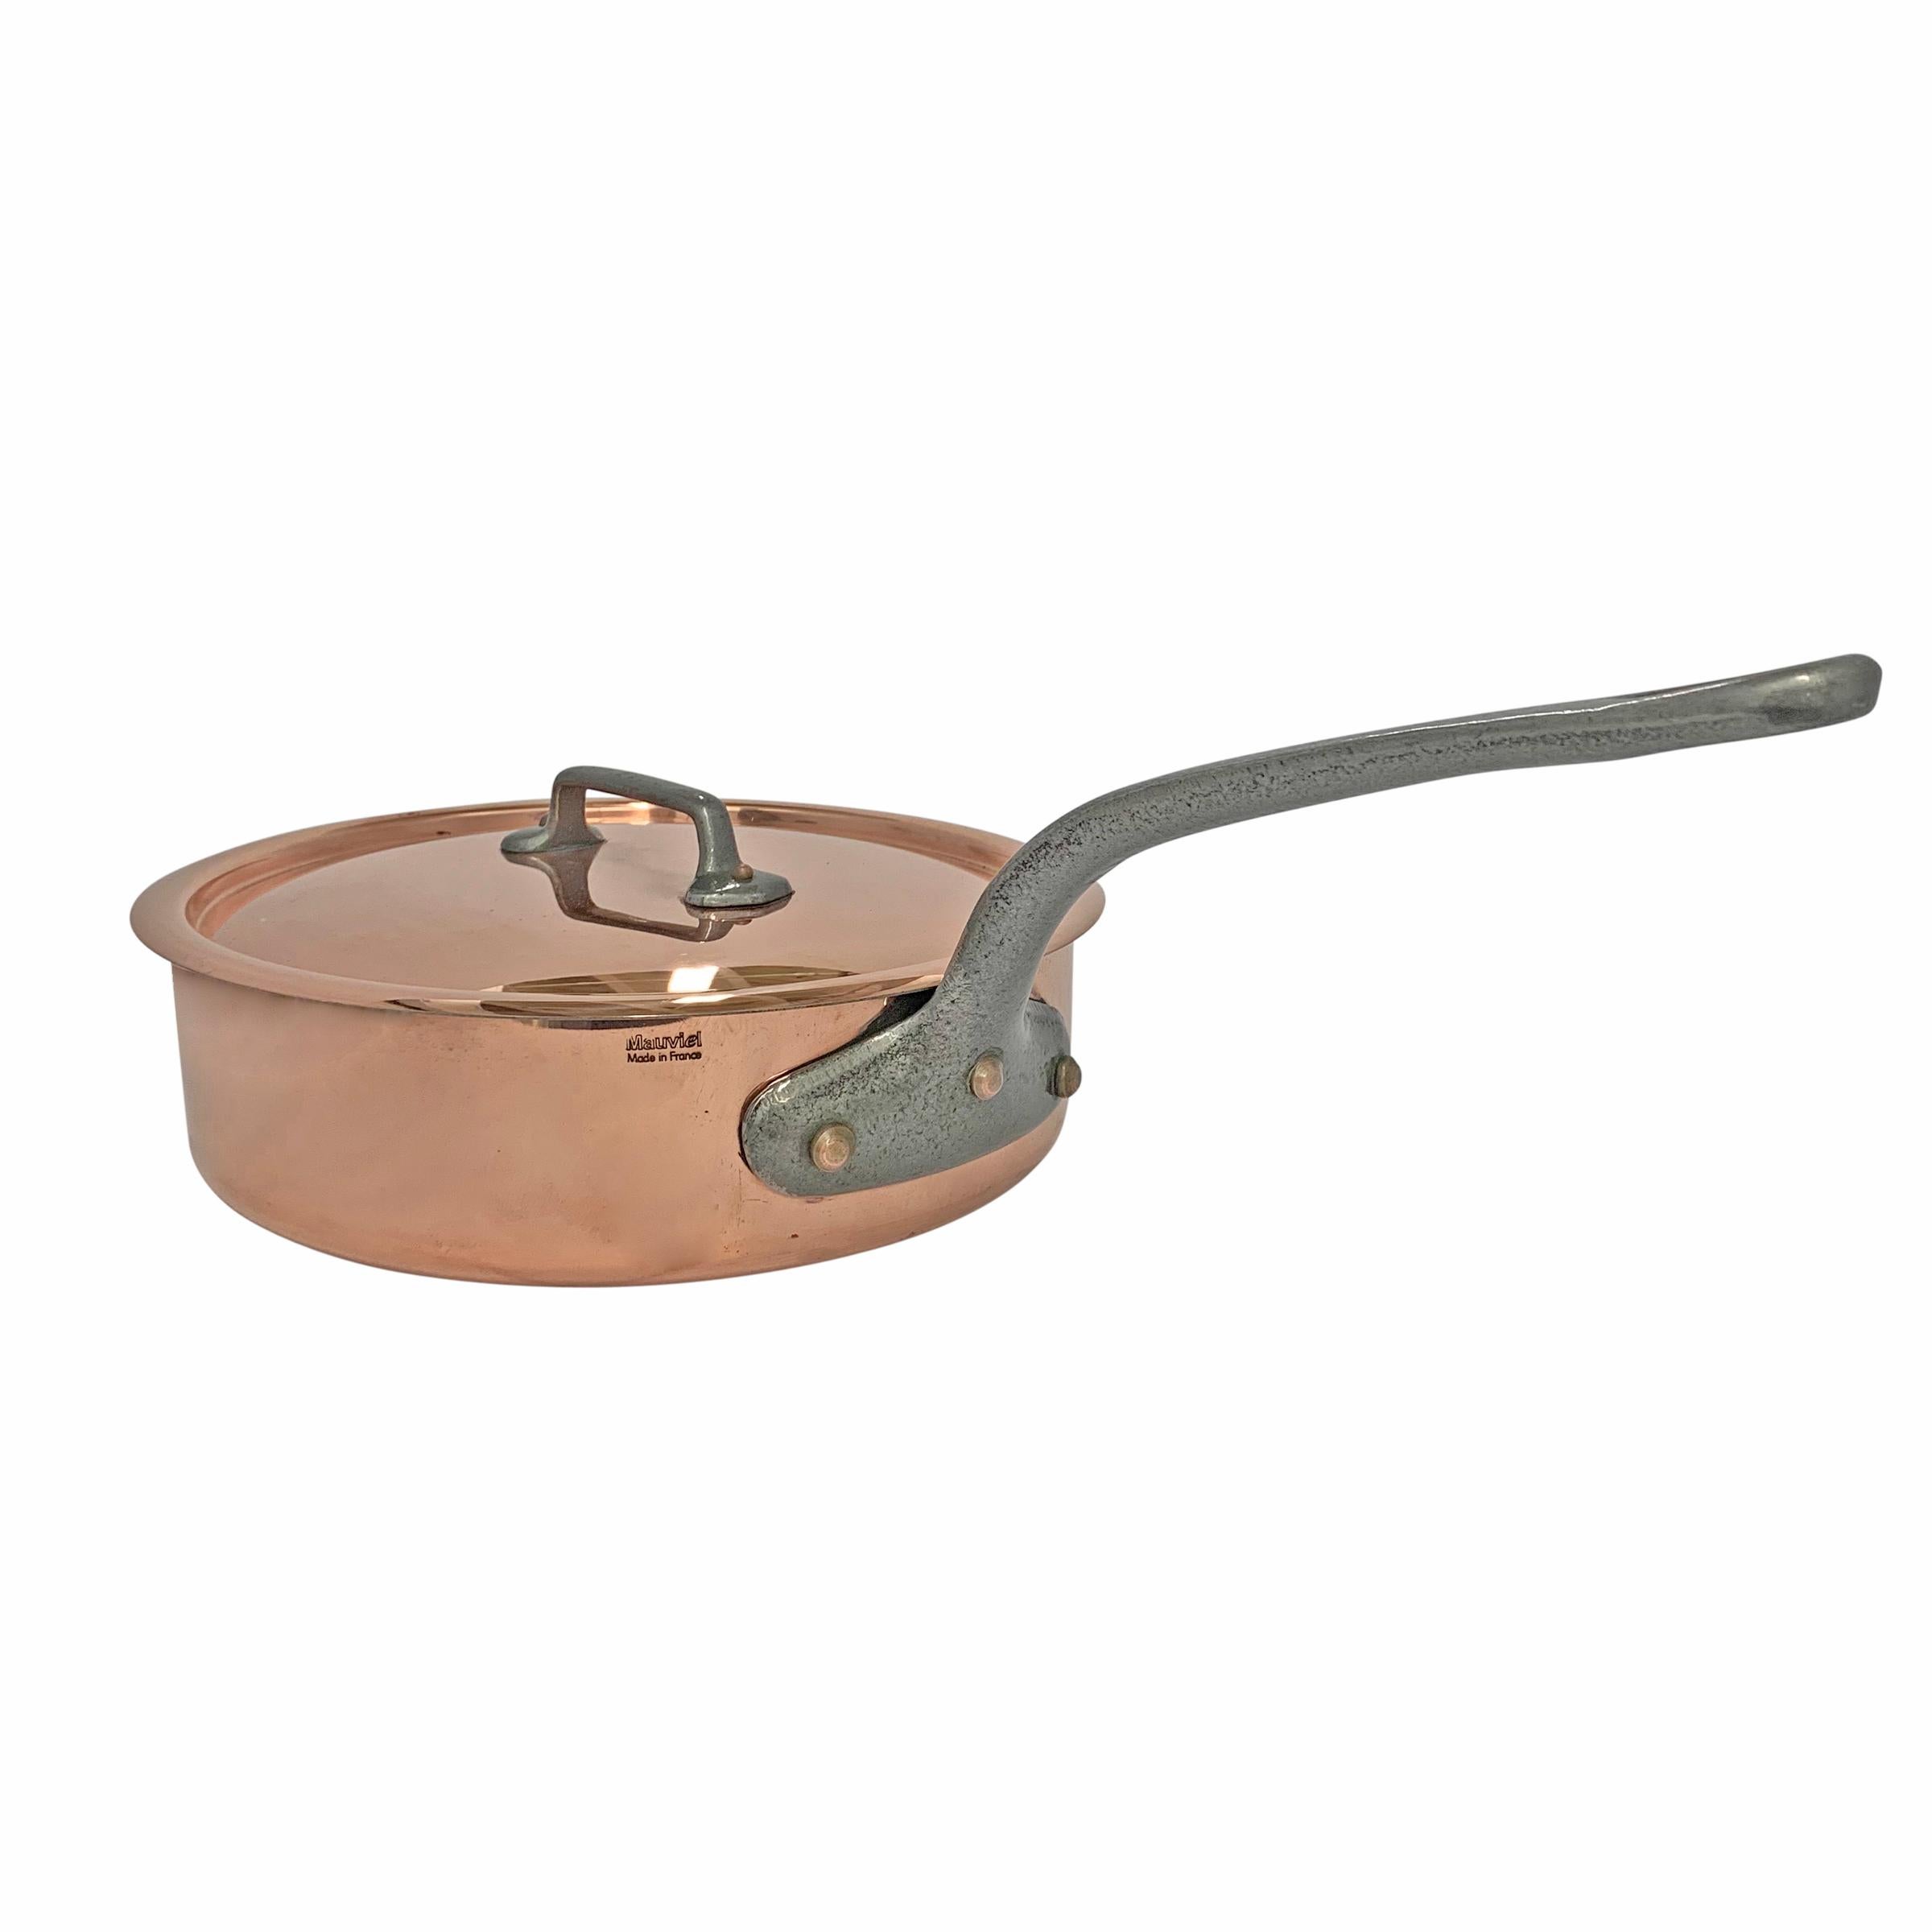 A mid-20th century French 3 mm thick copper sauté pan with lid, iron handles, and a tin lining. Marked 